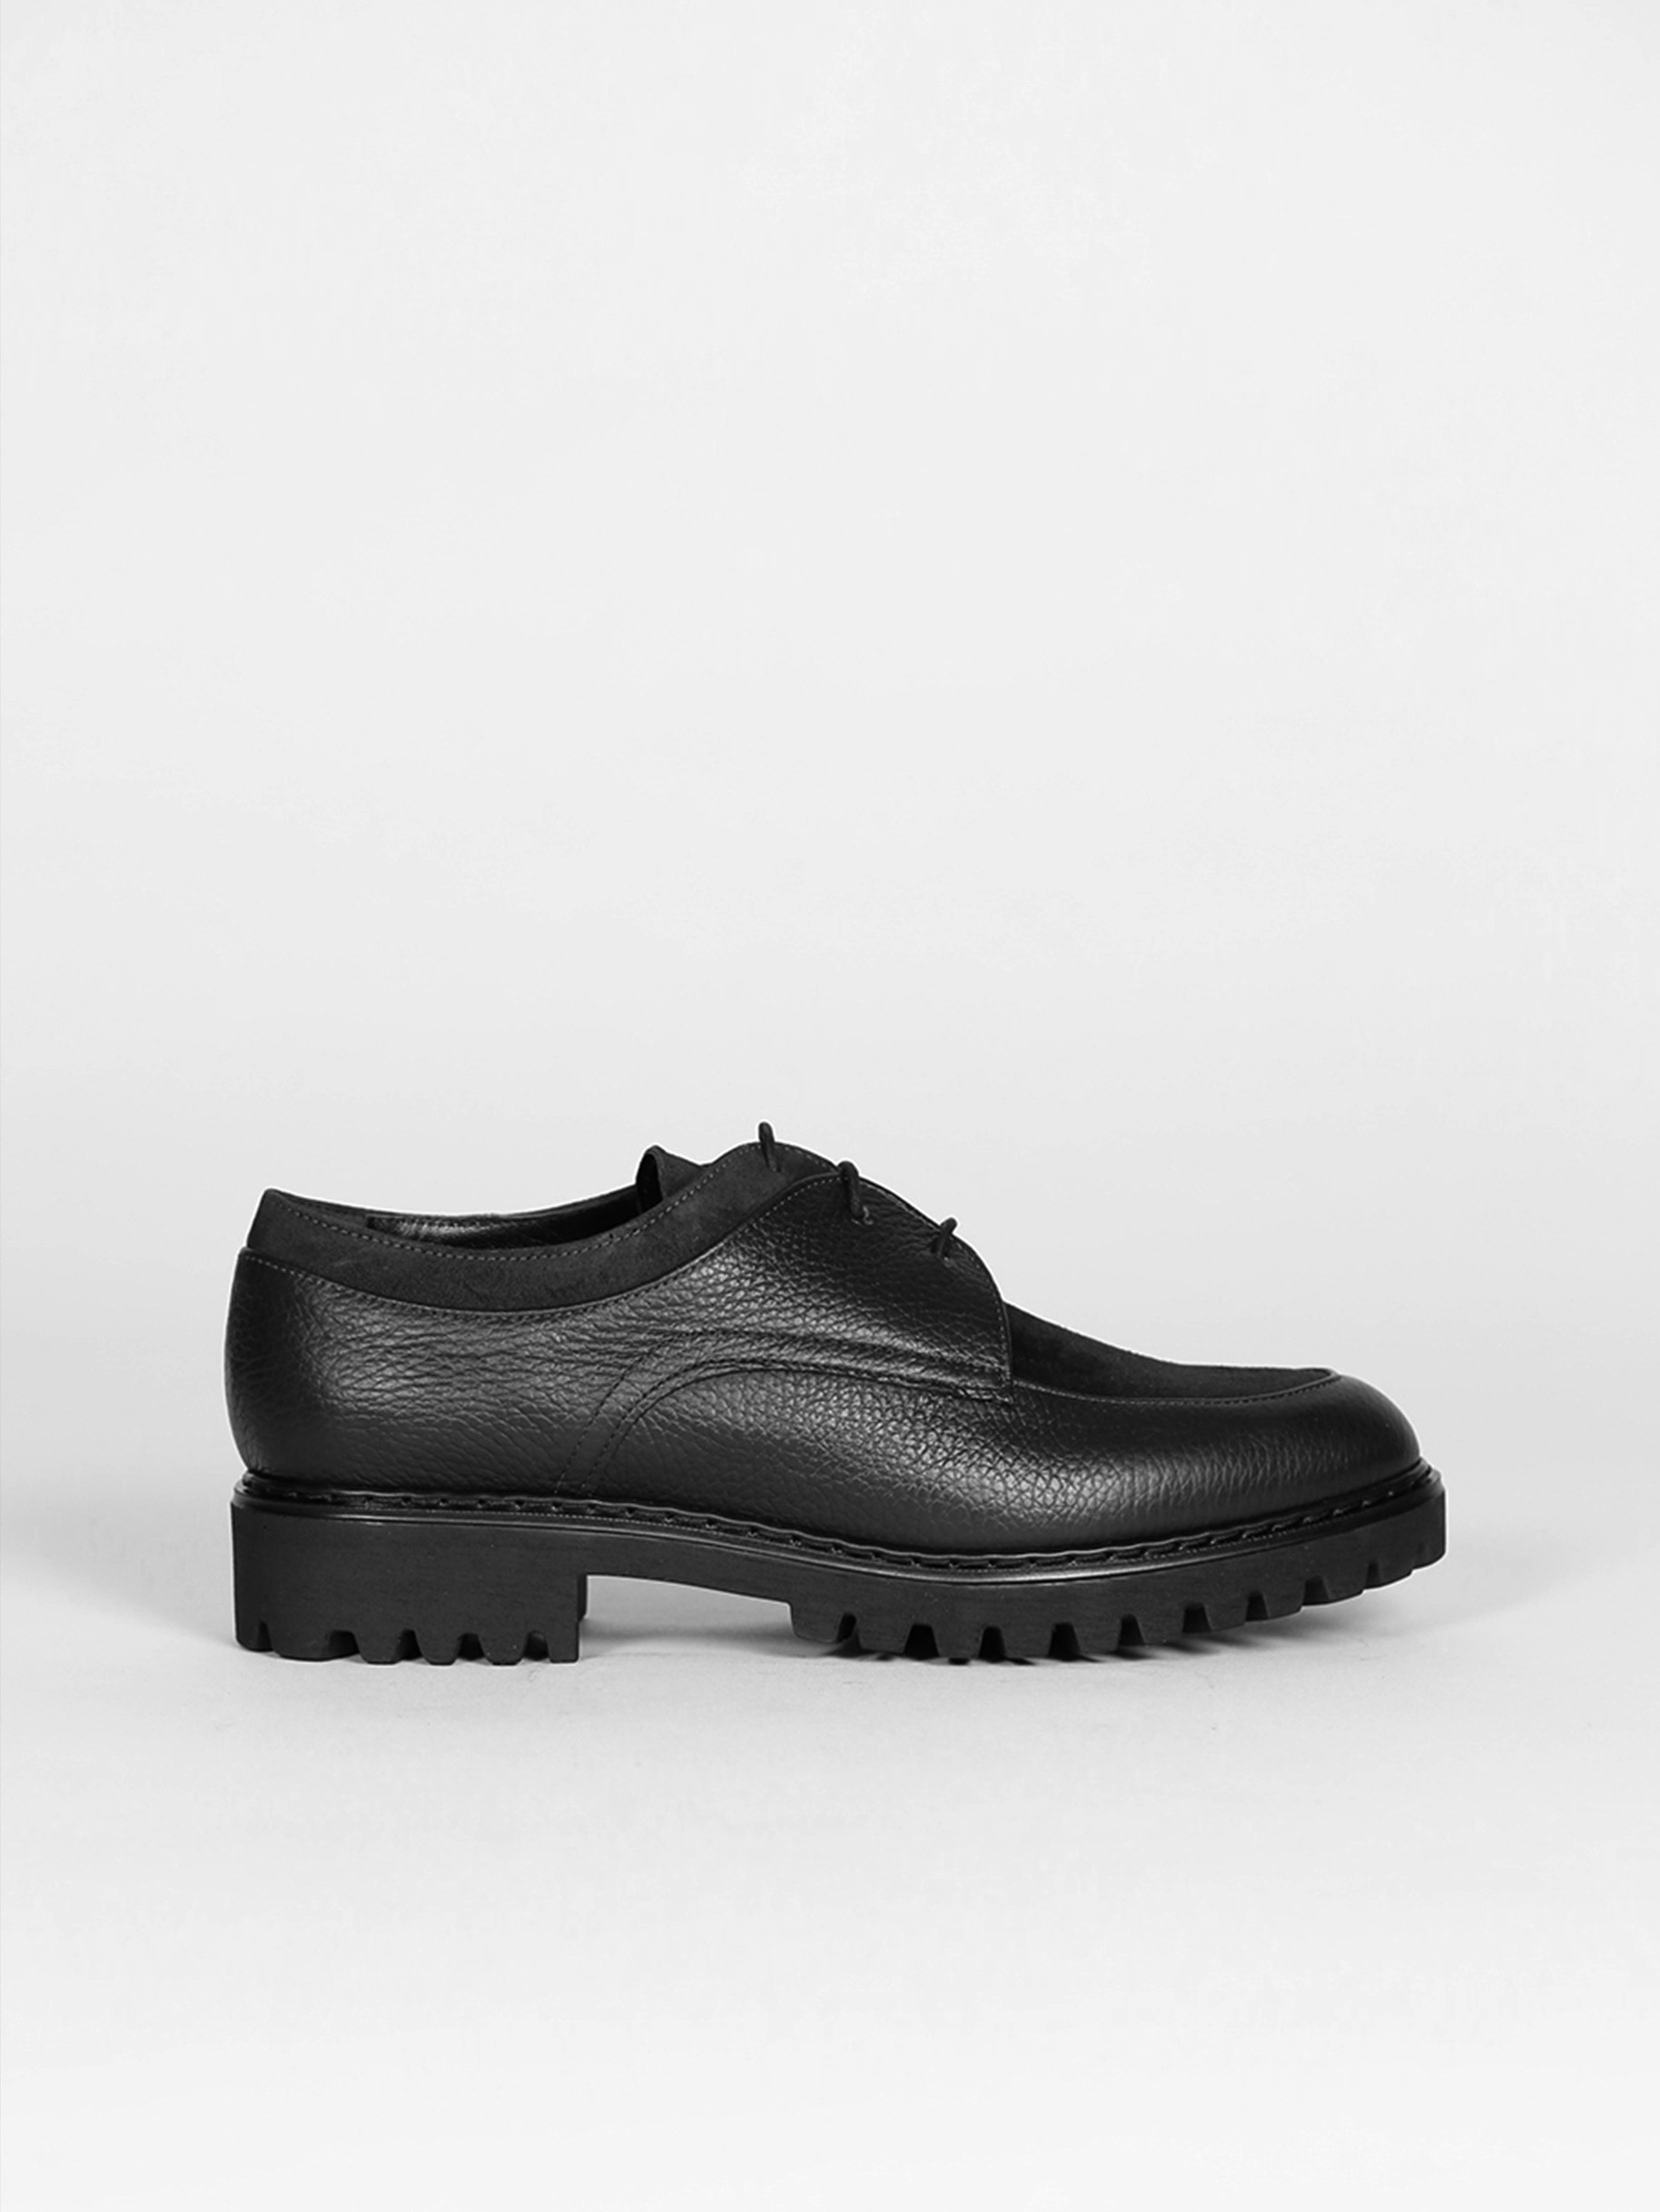 Black grained leather and suede derbies